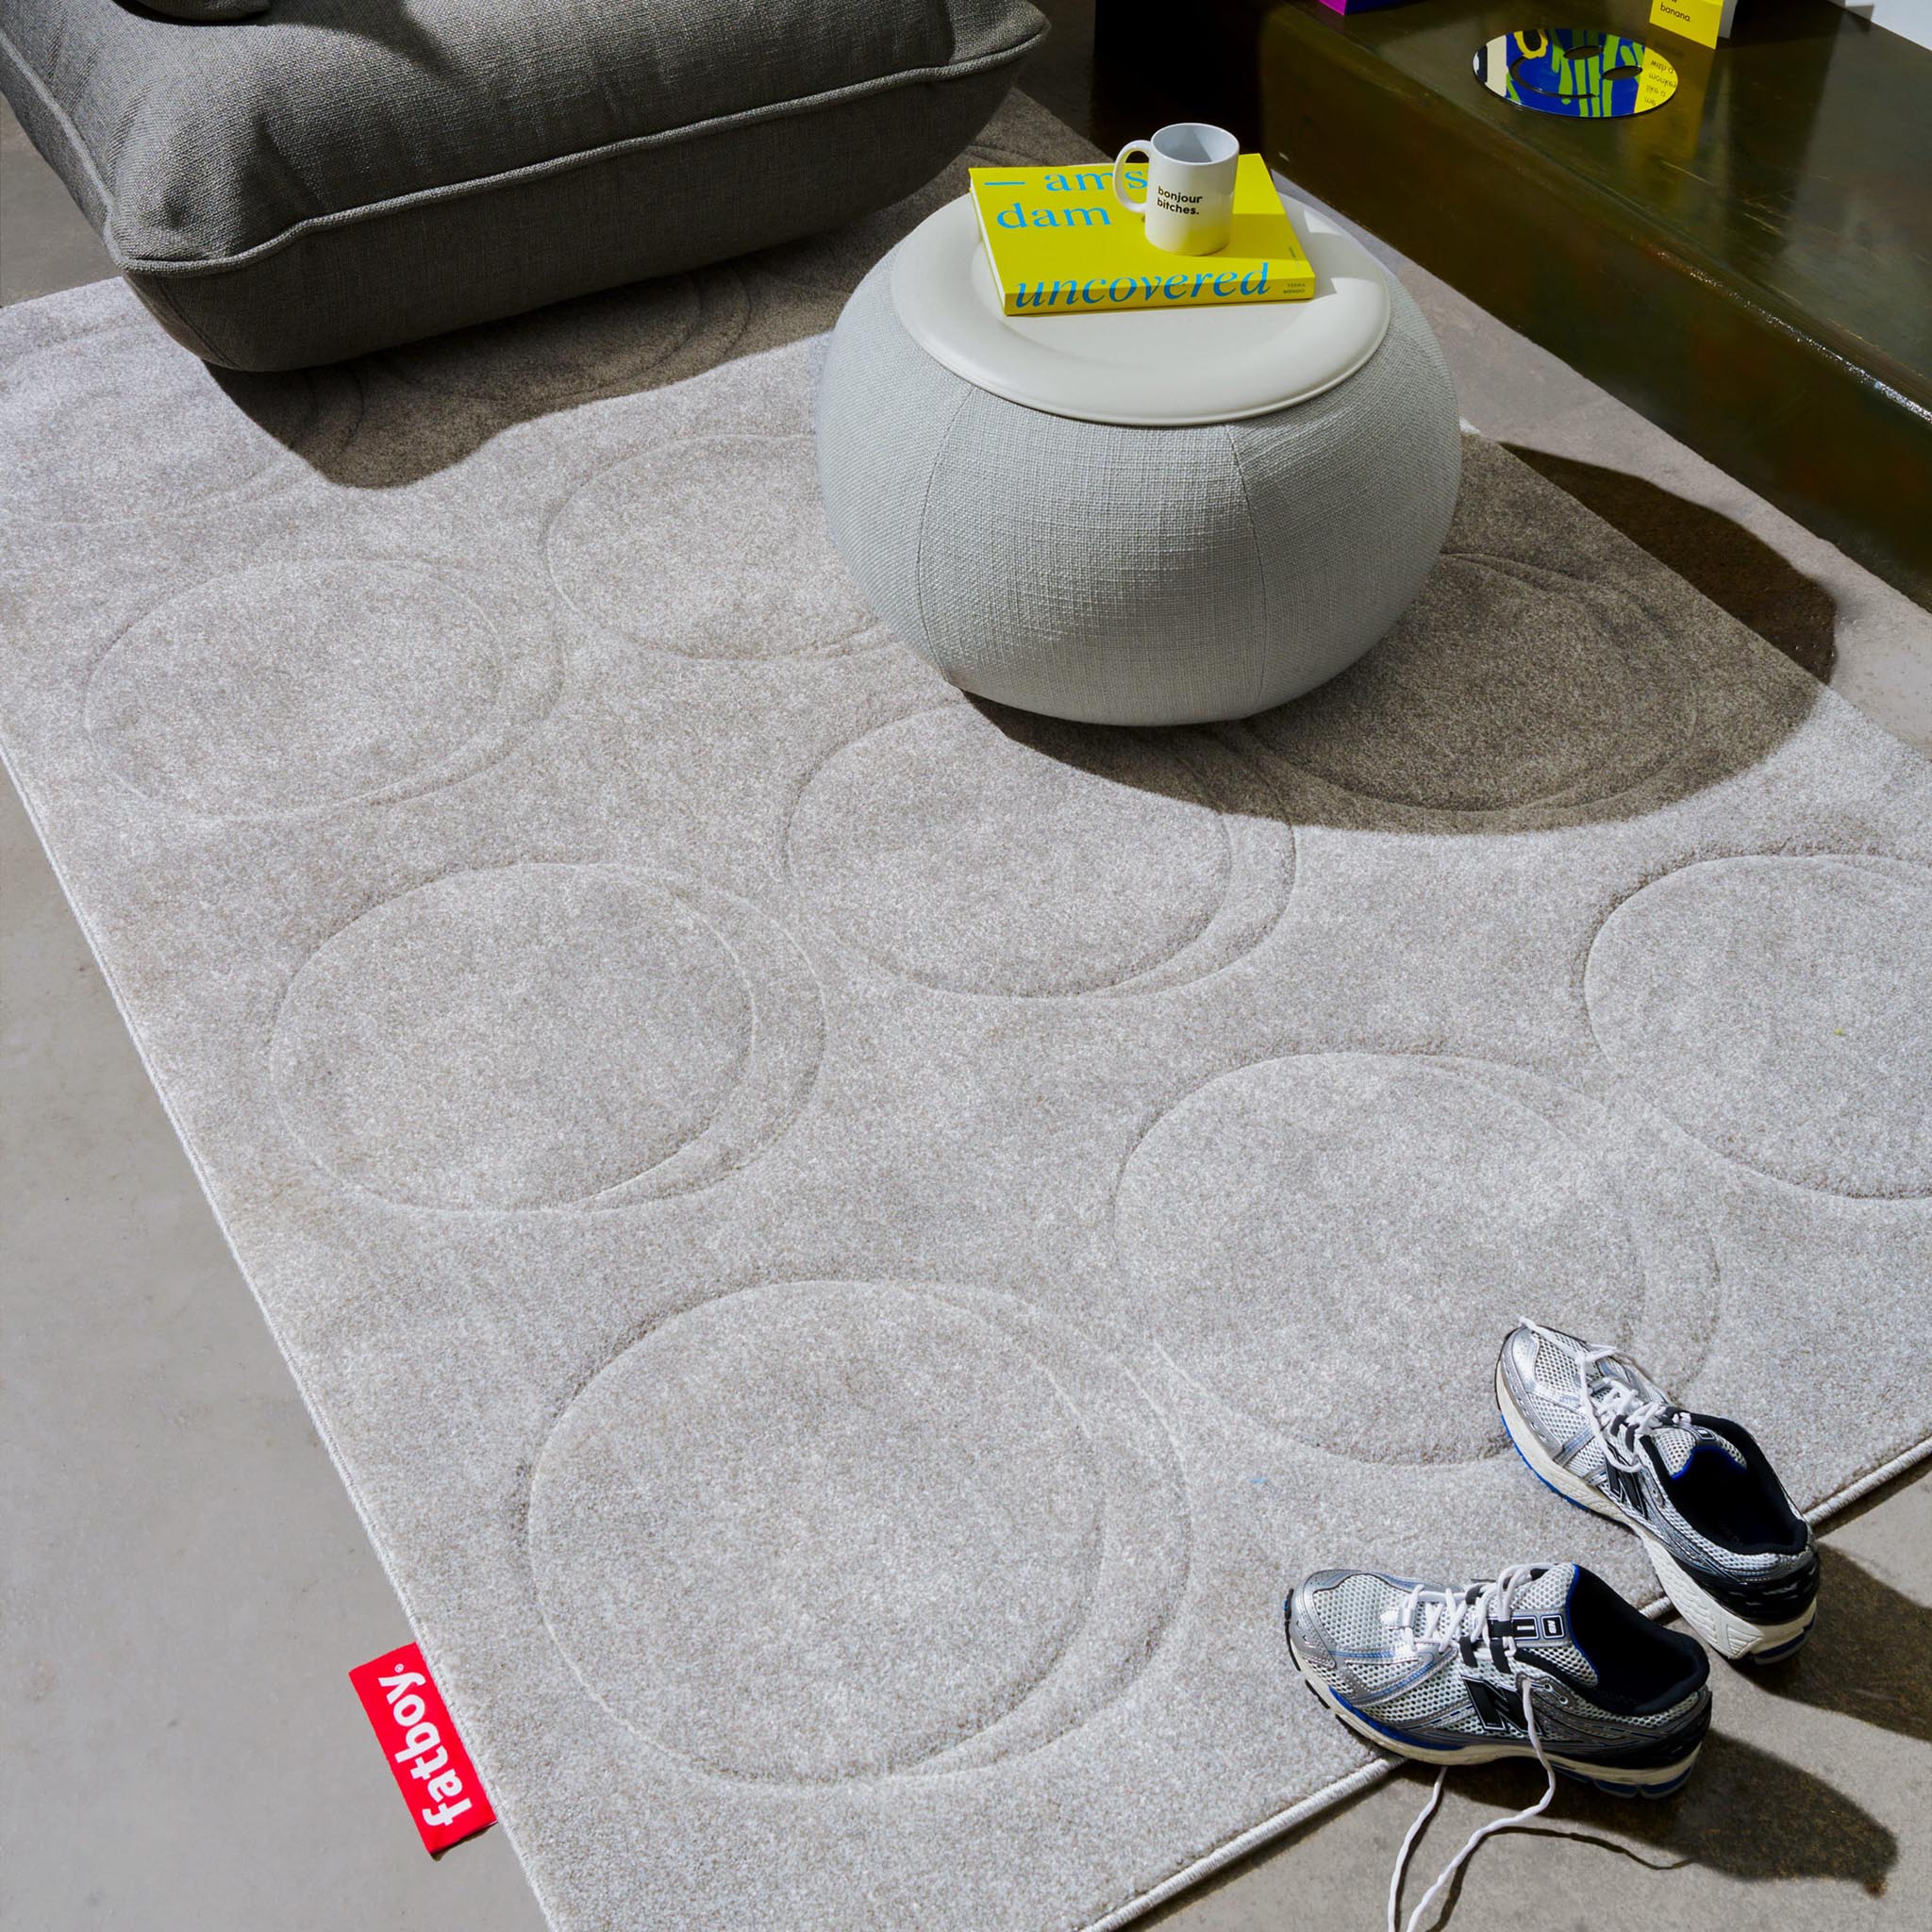 Fatboy Dot Carpet, 160x230 cm, blends style and comfort, with plush design in neutral hues.